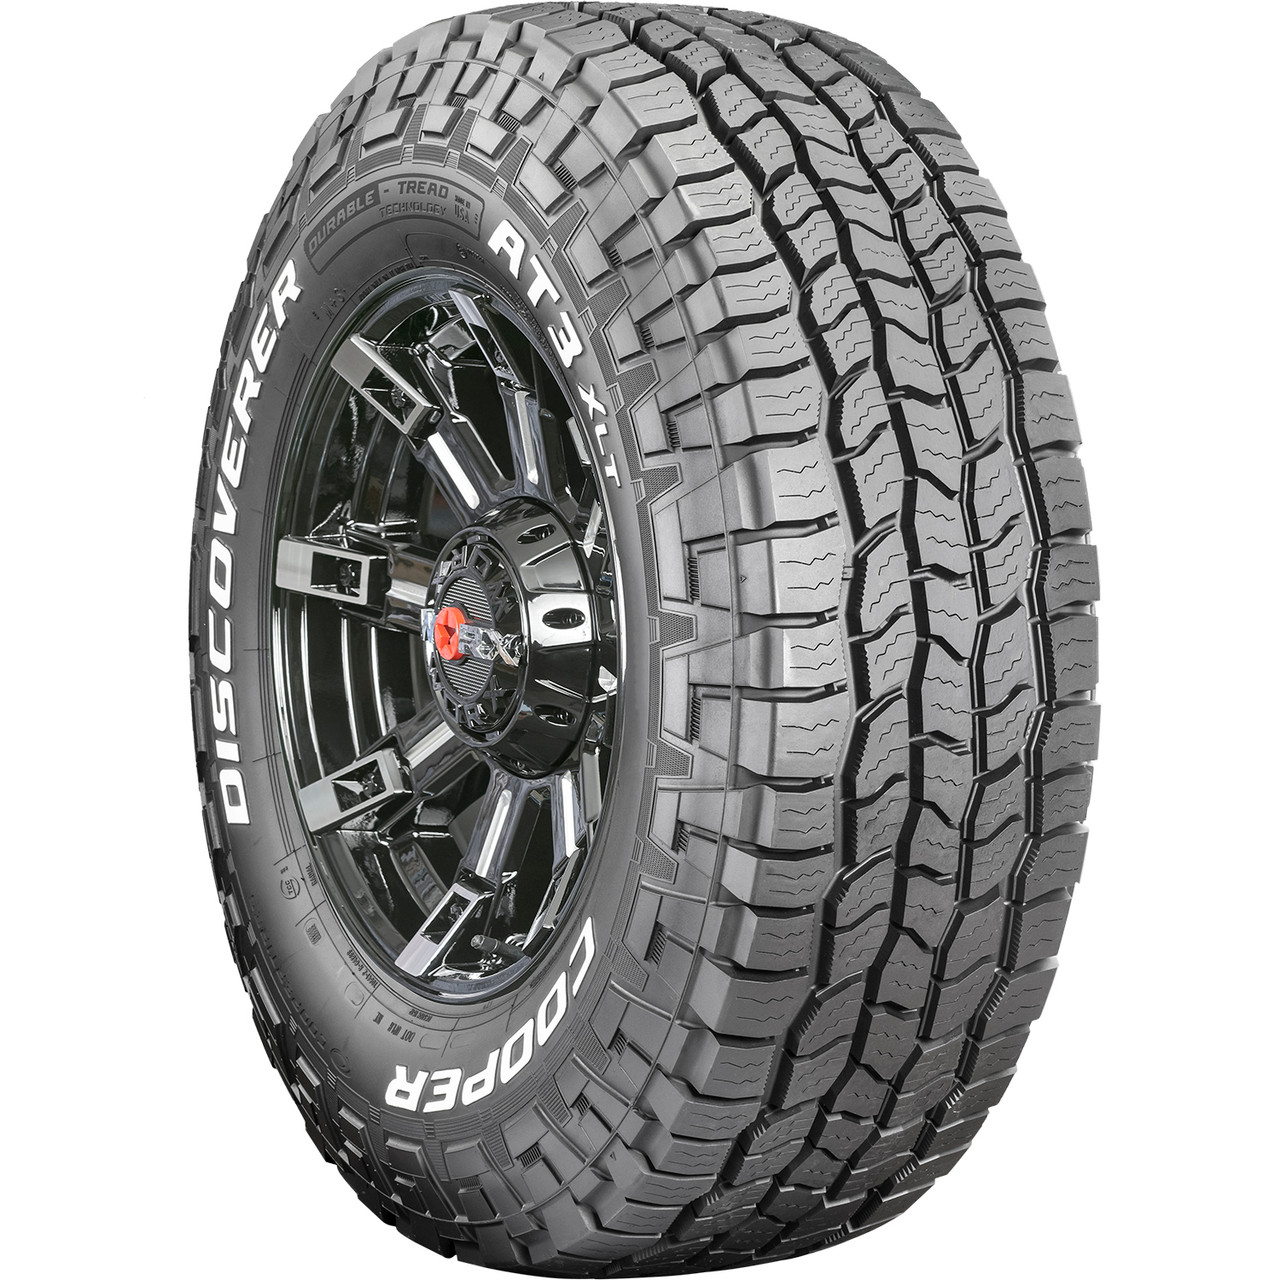 Photos - Motorcycle Tyre Cooper Discoverer AT3 XLT 295/70R17, All Season, All Terrain tires. 